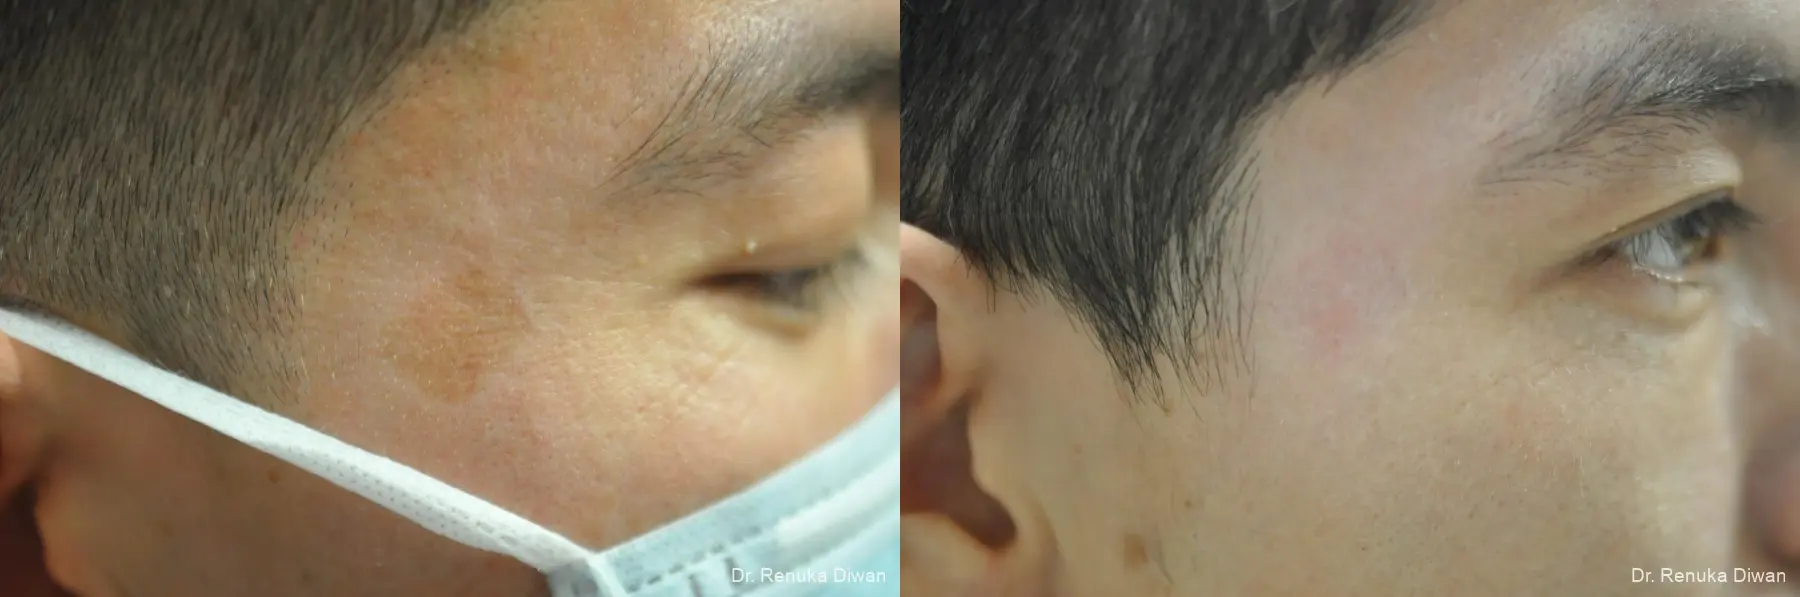 Mole-removal-for-men: Patient 1 - Before and After  